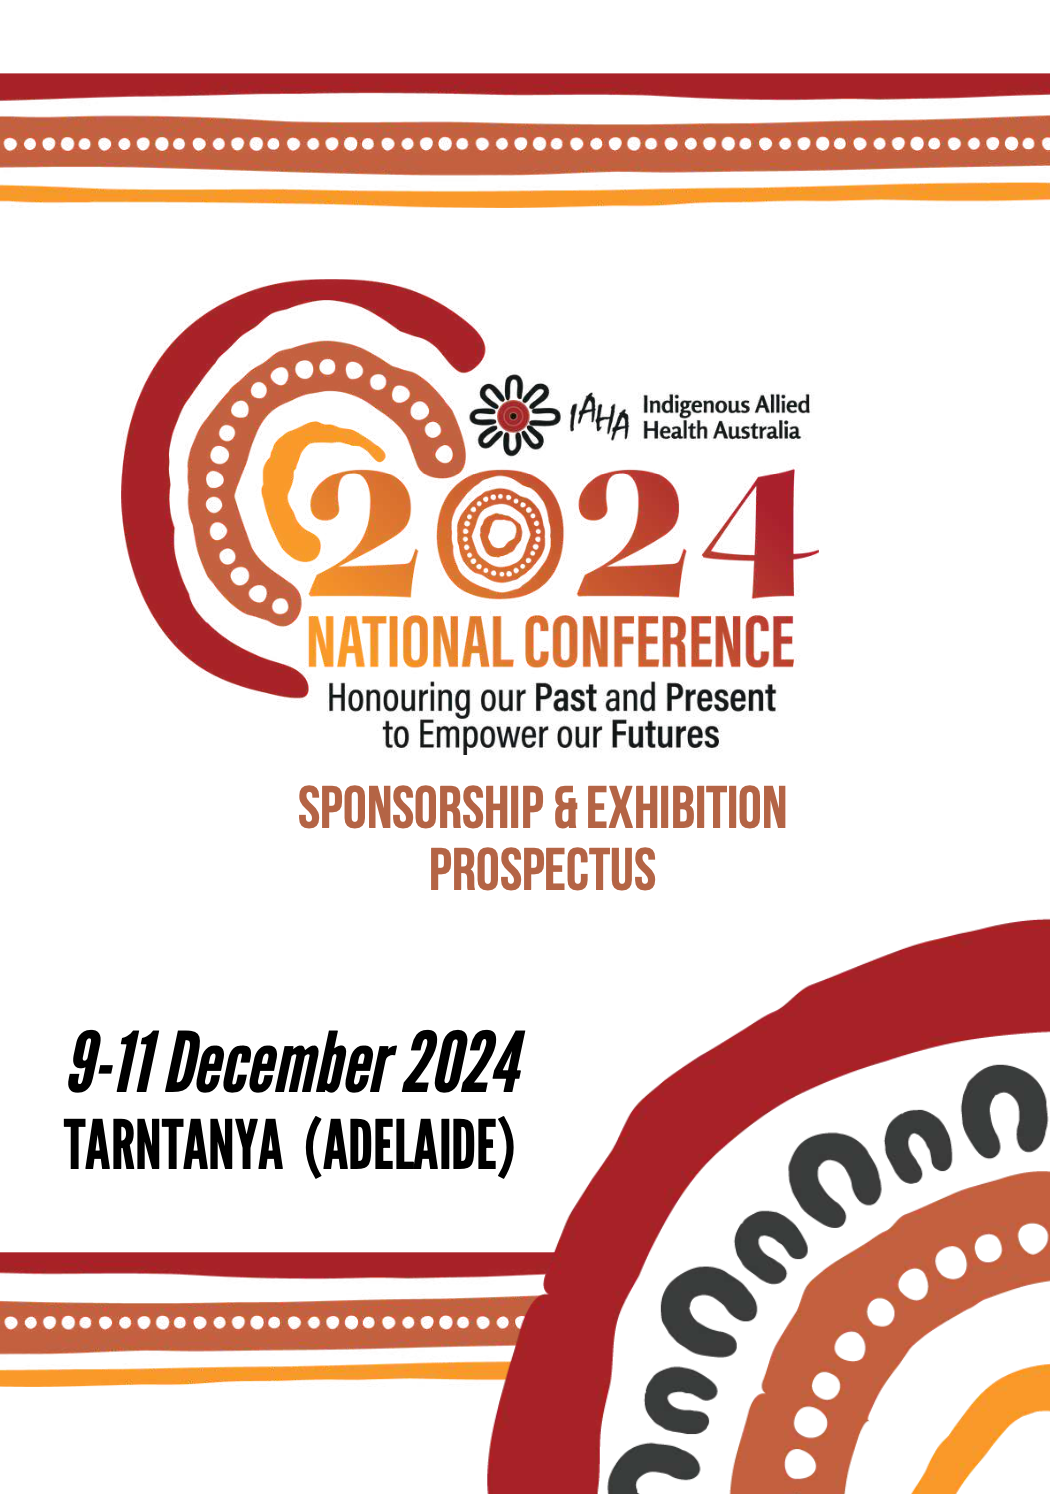 Image for IAHA National Conference Sponsorship